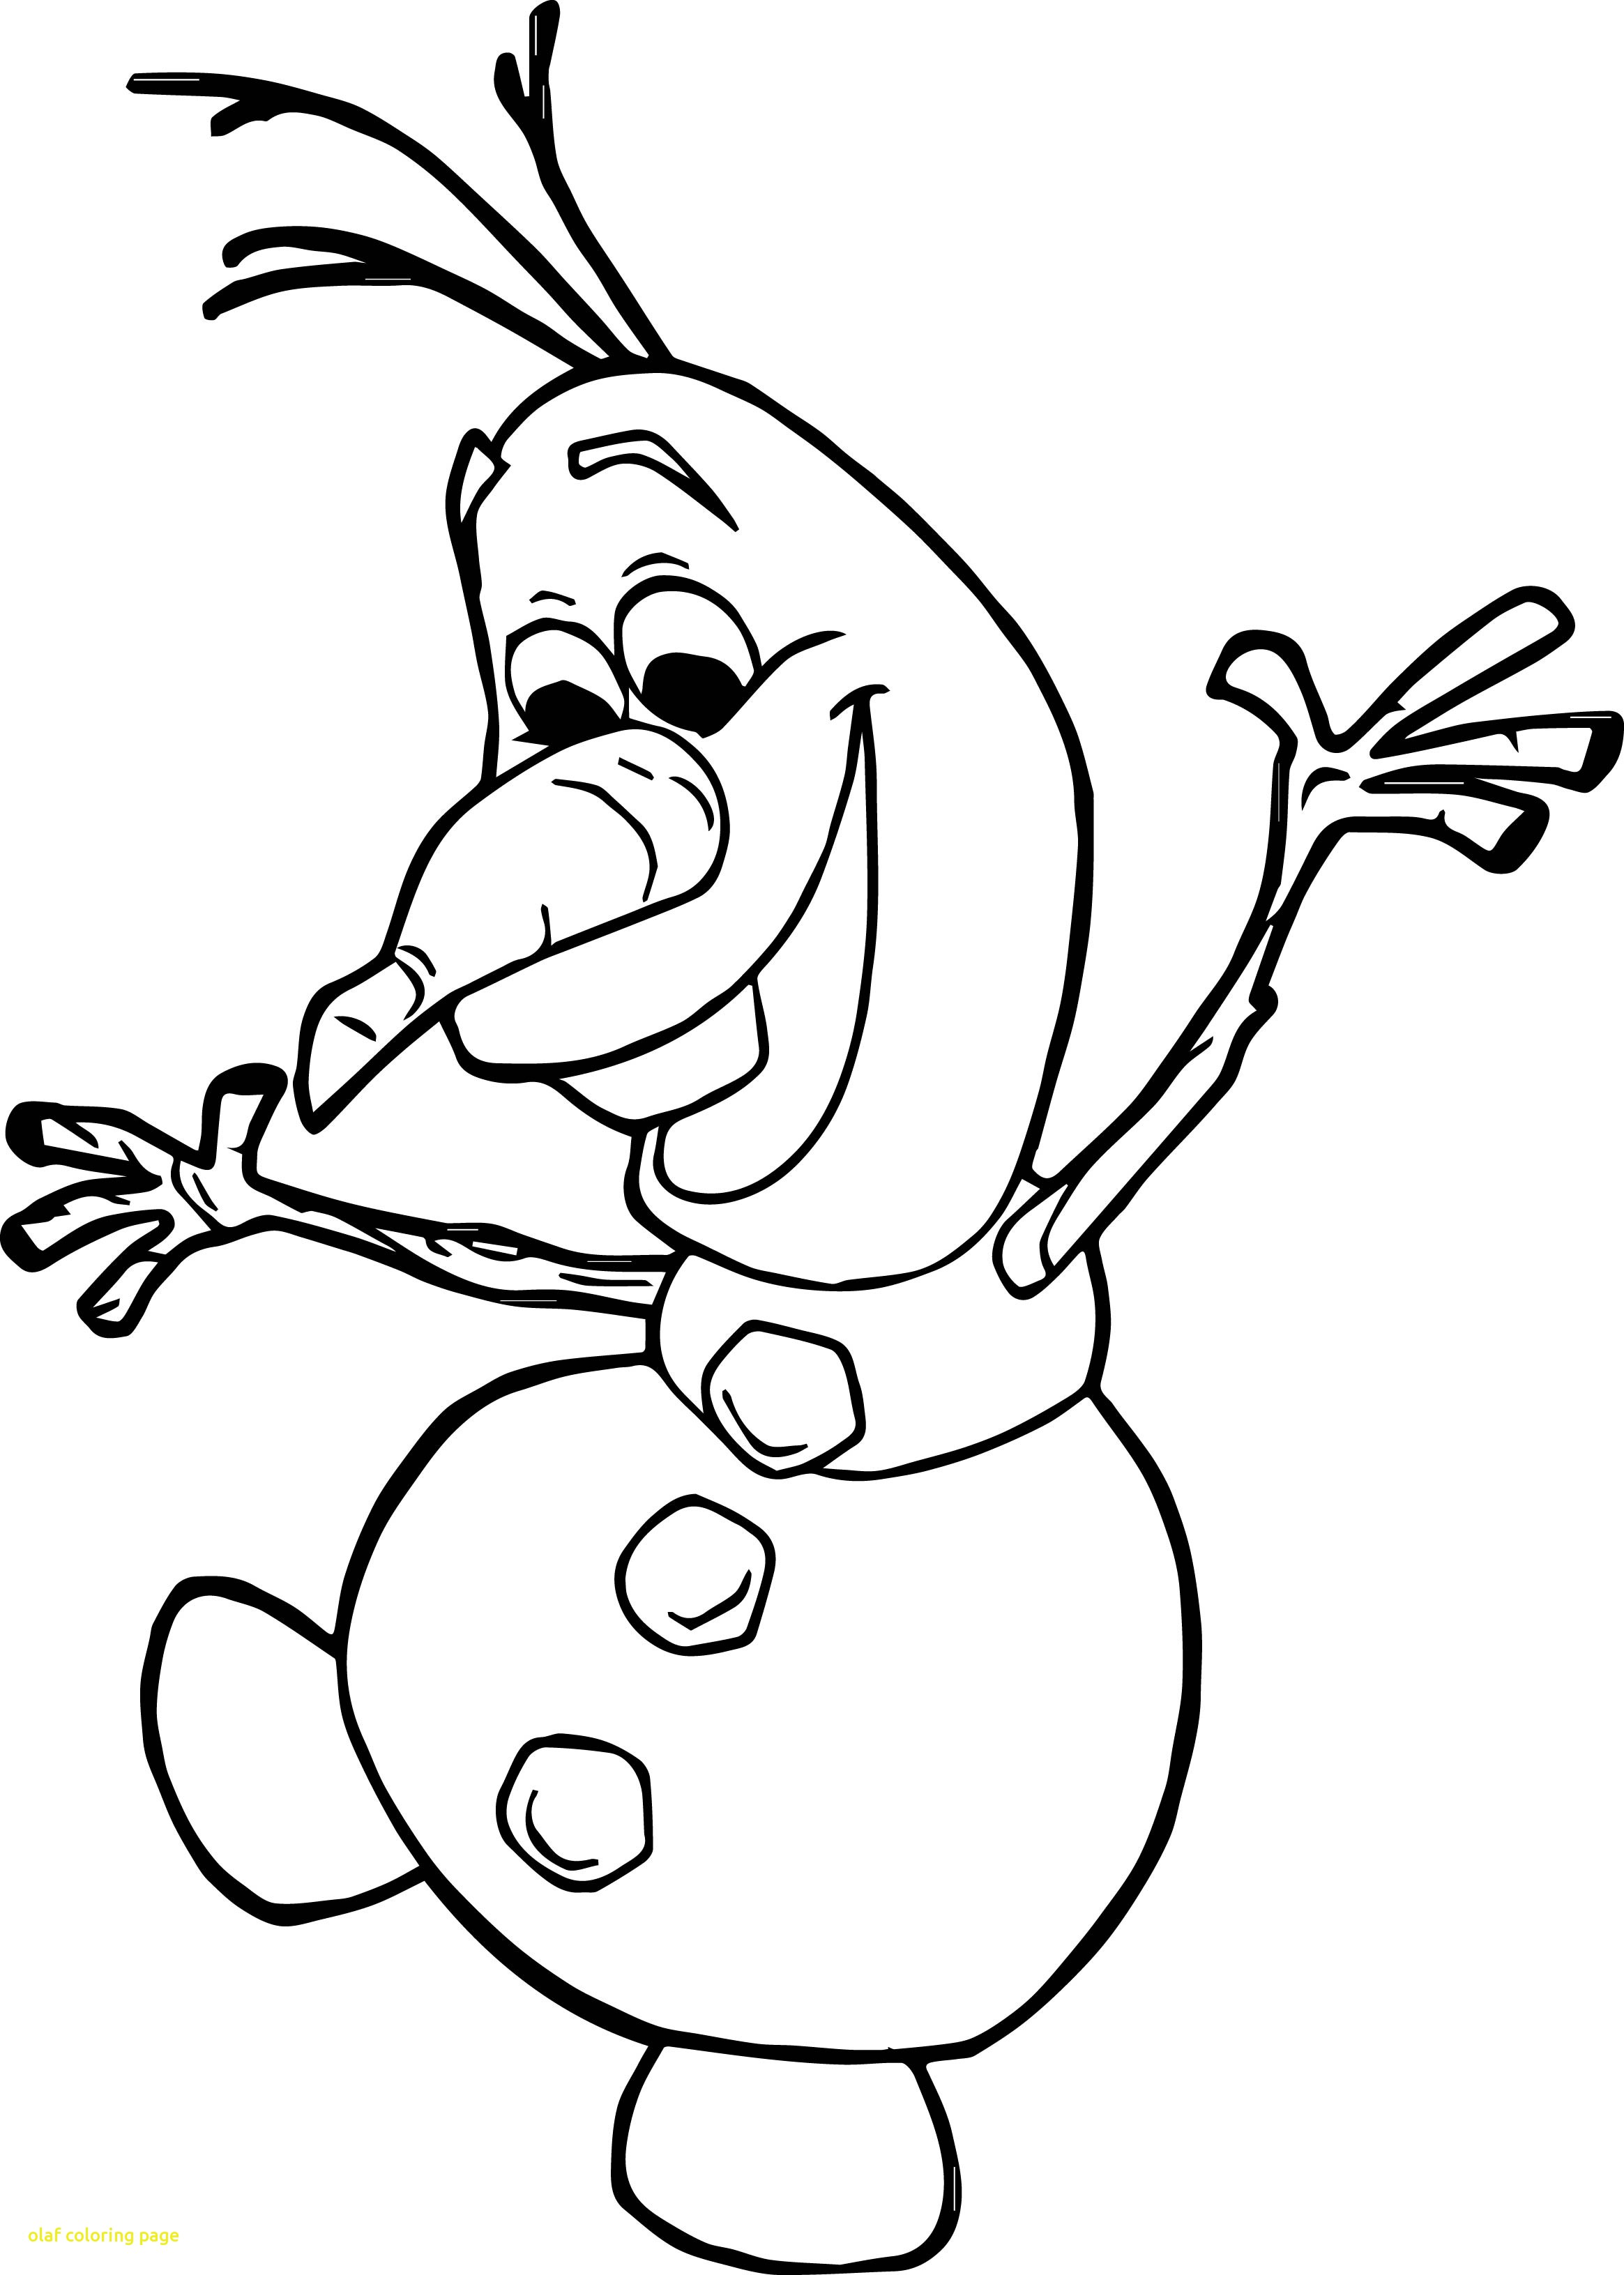 Frozen Olaf Coloring Pages at Free printable